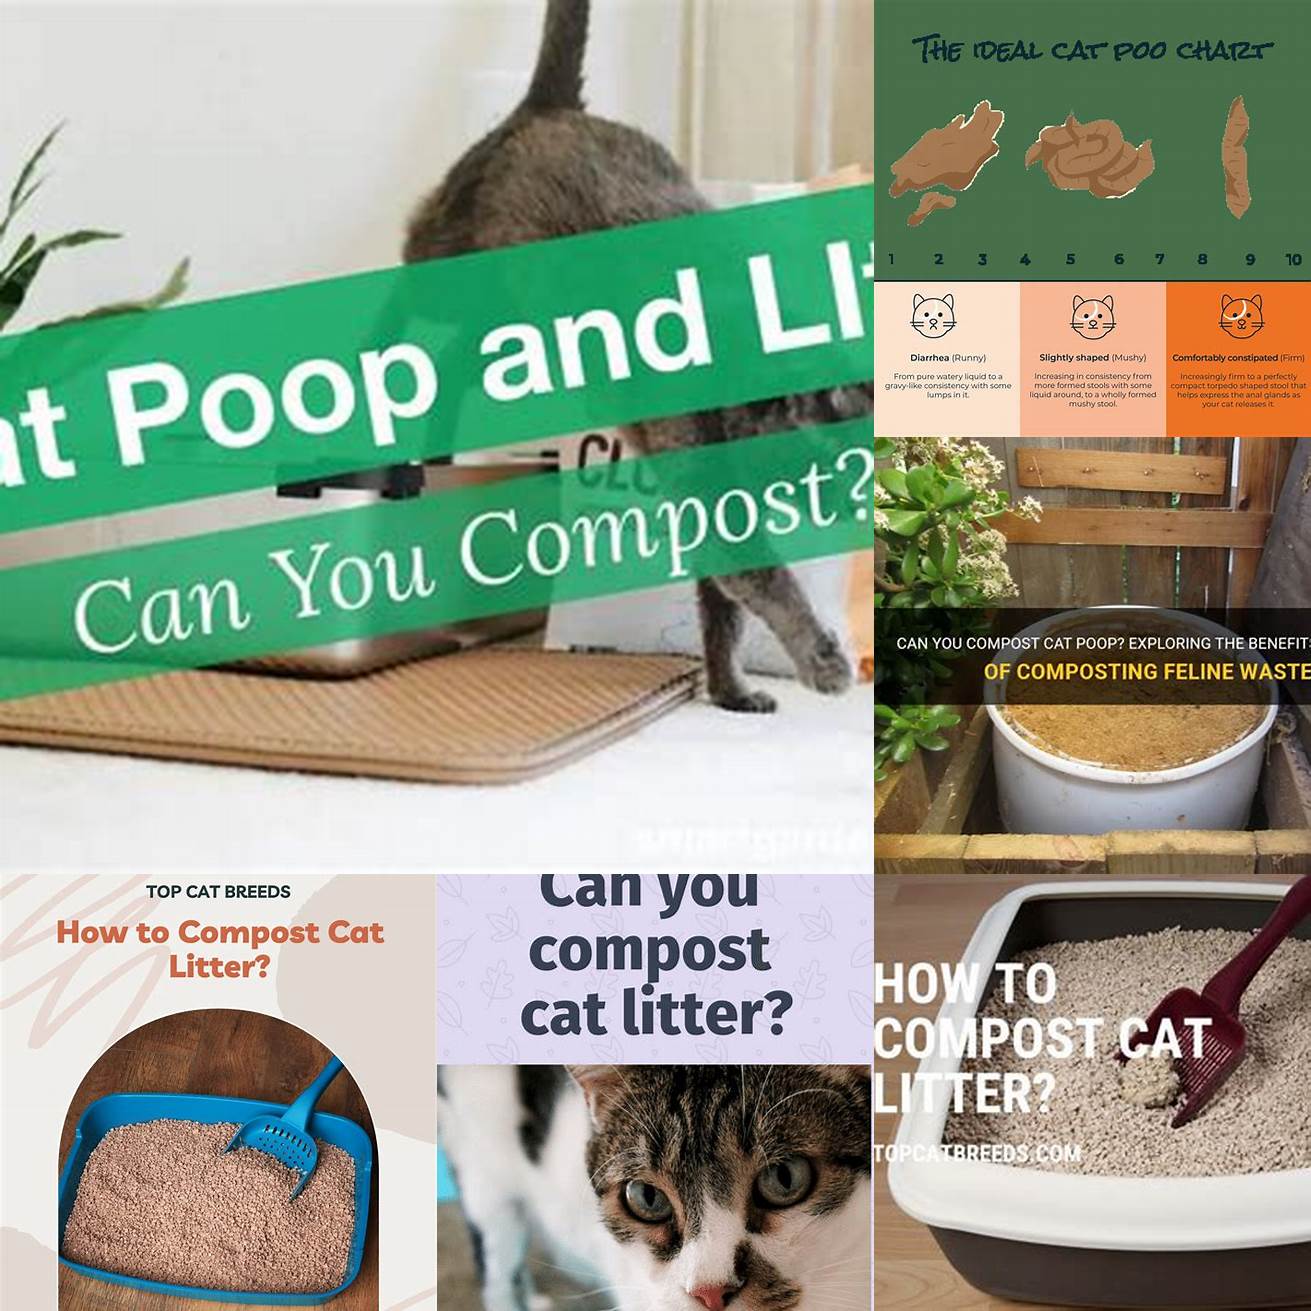 Q Is it safe to compost cat poop